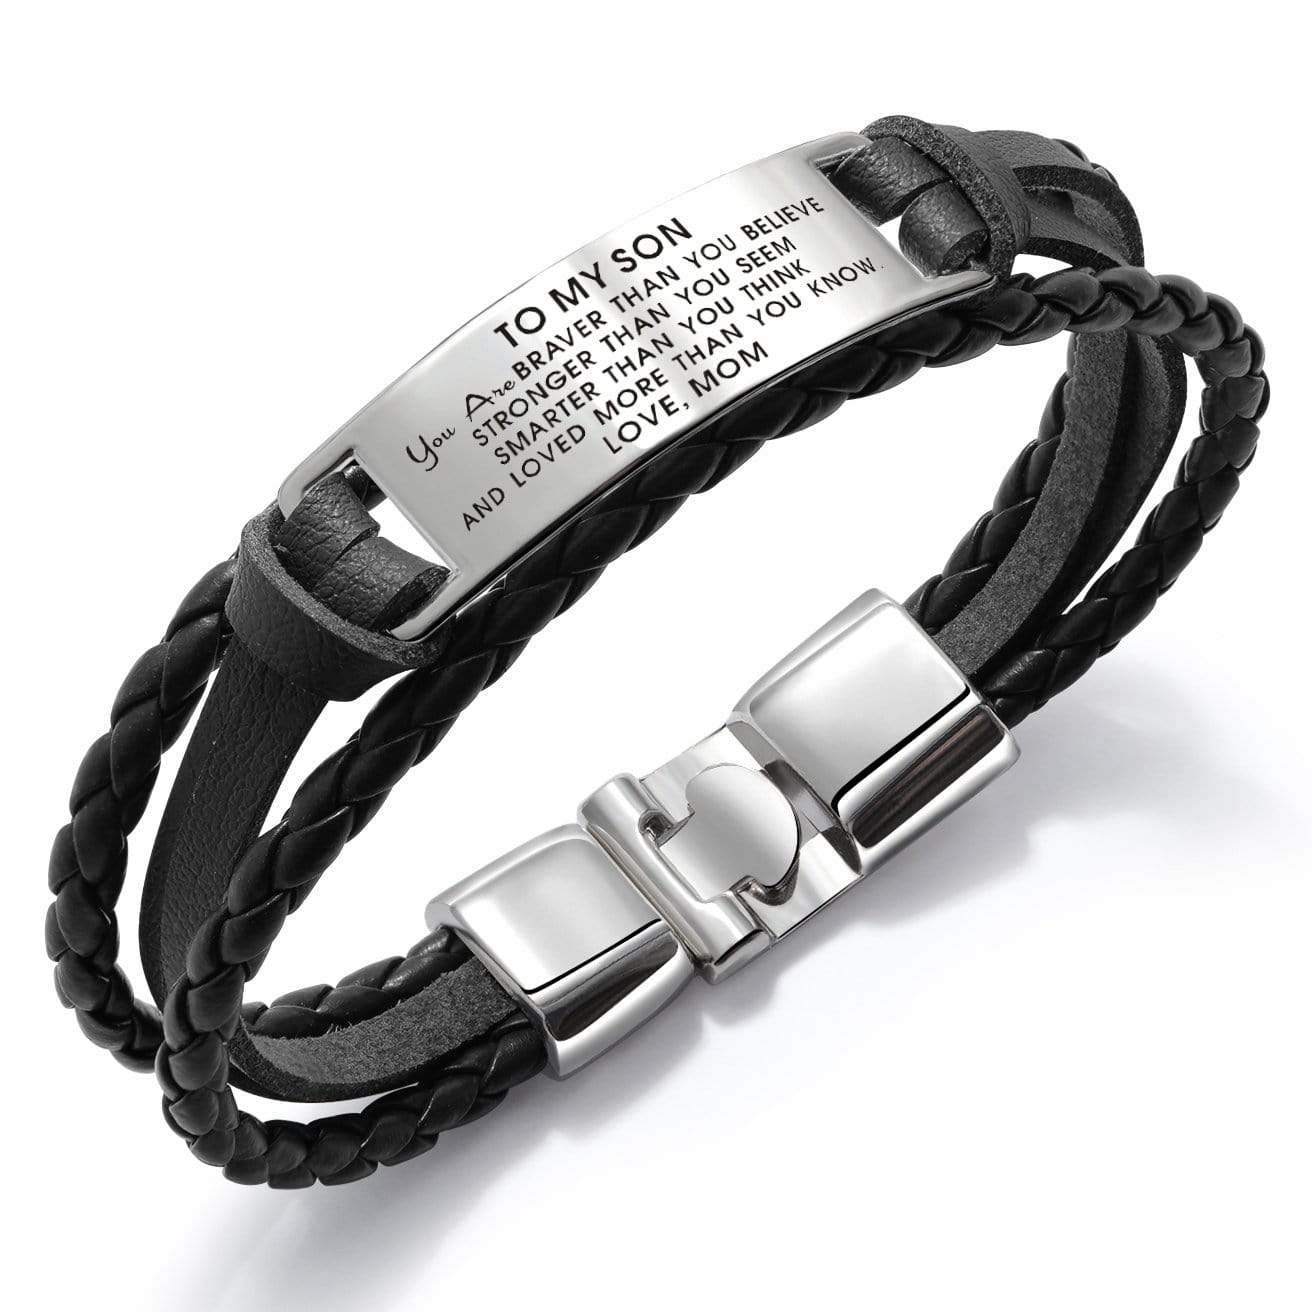 Bracelets Mom To Son - You Are Loved More Than You Know Leather Bracelet Black GiveMe-Gifts